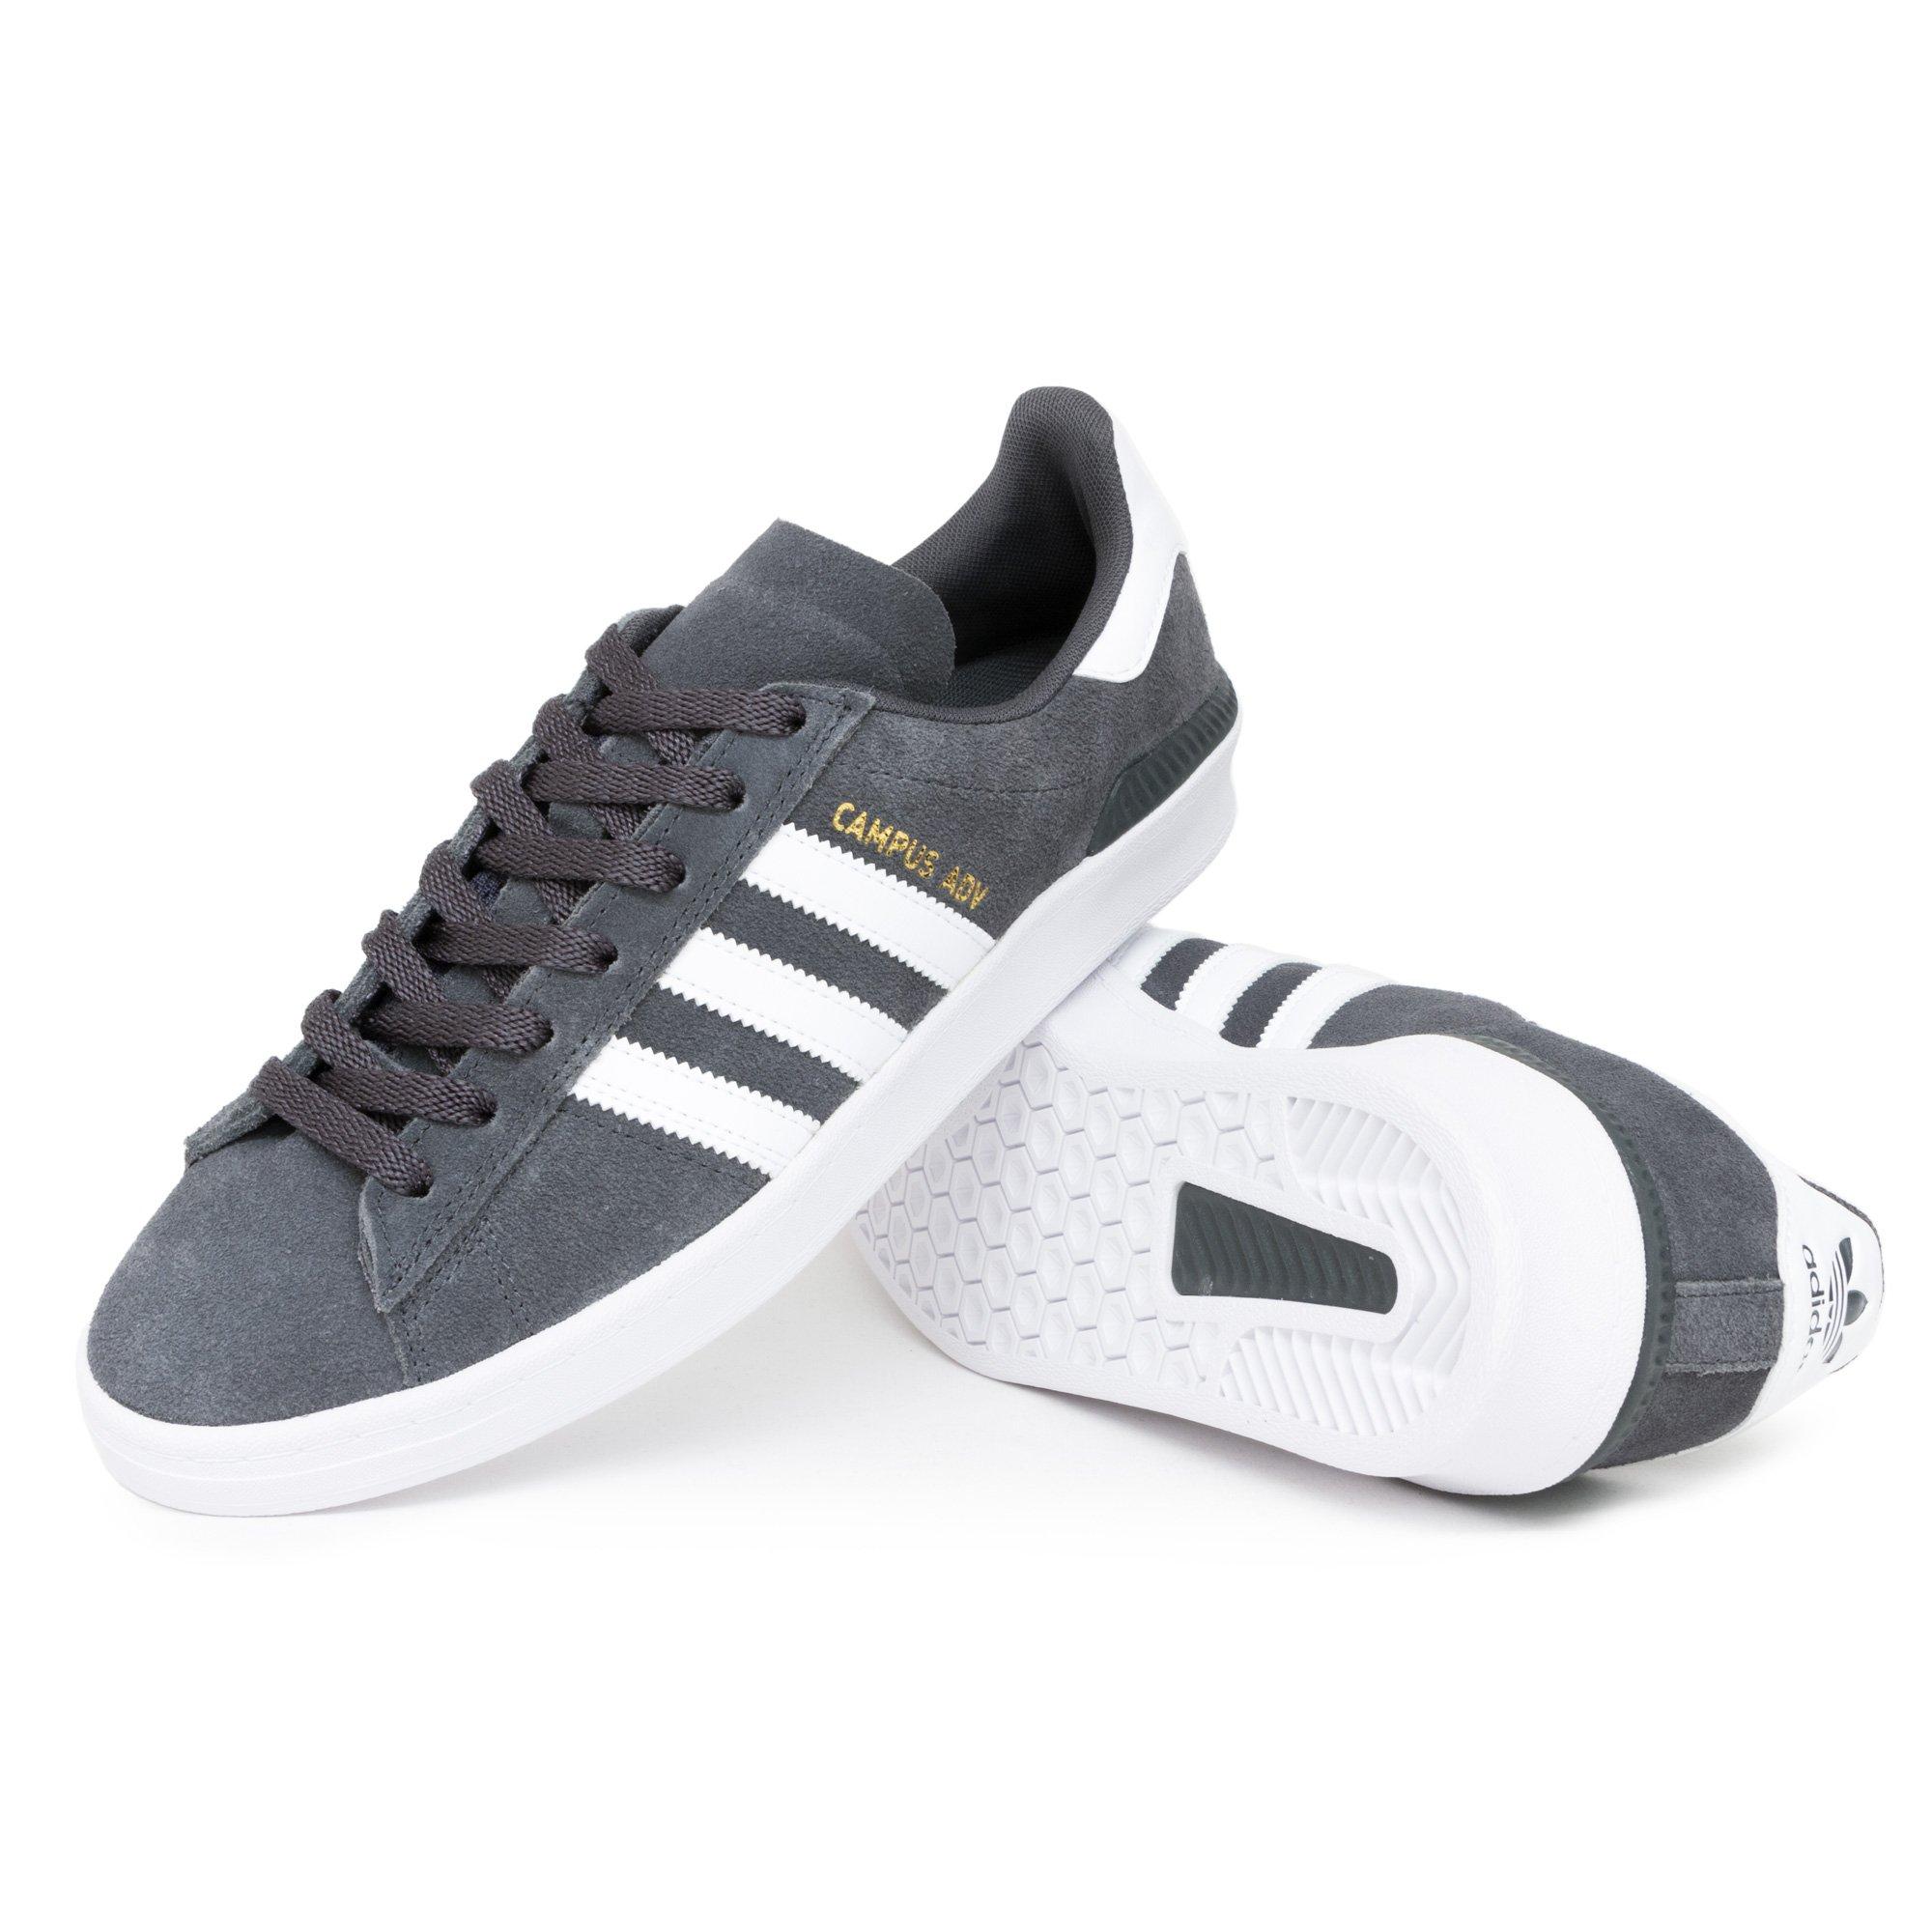 adidas Campus Adv Shoes in Grey (Gray) for Men - Save 31% - Lyst